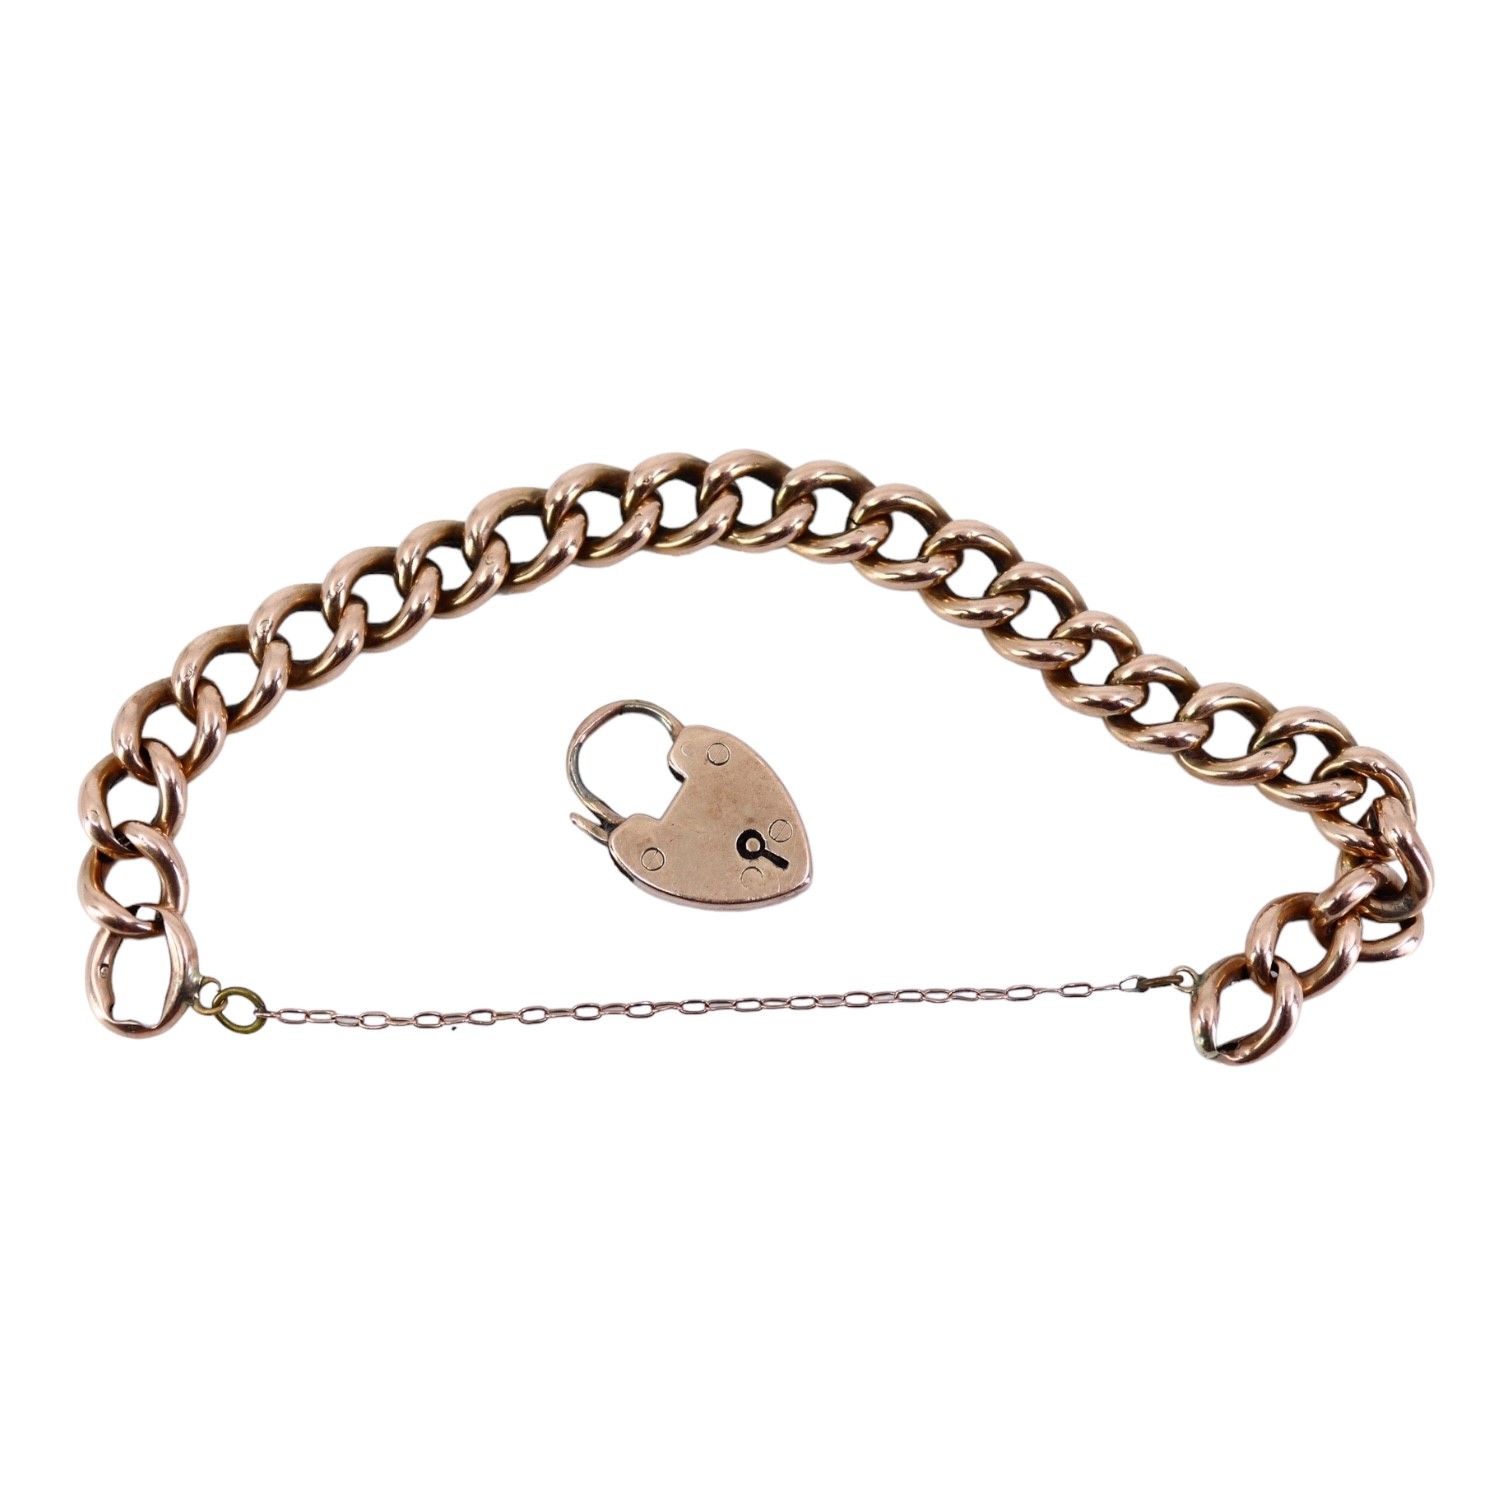 AN EDWARDIAN 9CT ROSE GOLD CURB LINK CHARM BRACELET Having heart shaped padlock clasp. (approx - Image 3 of 3